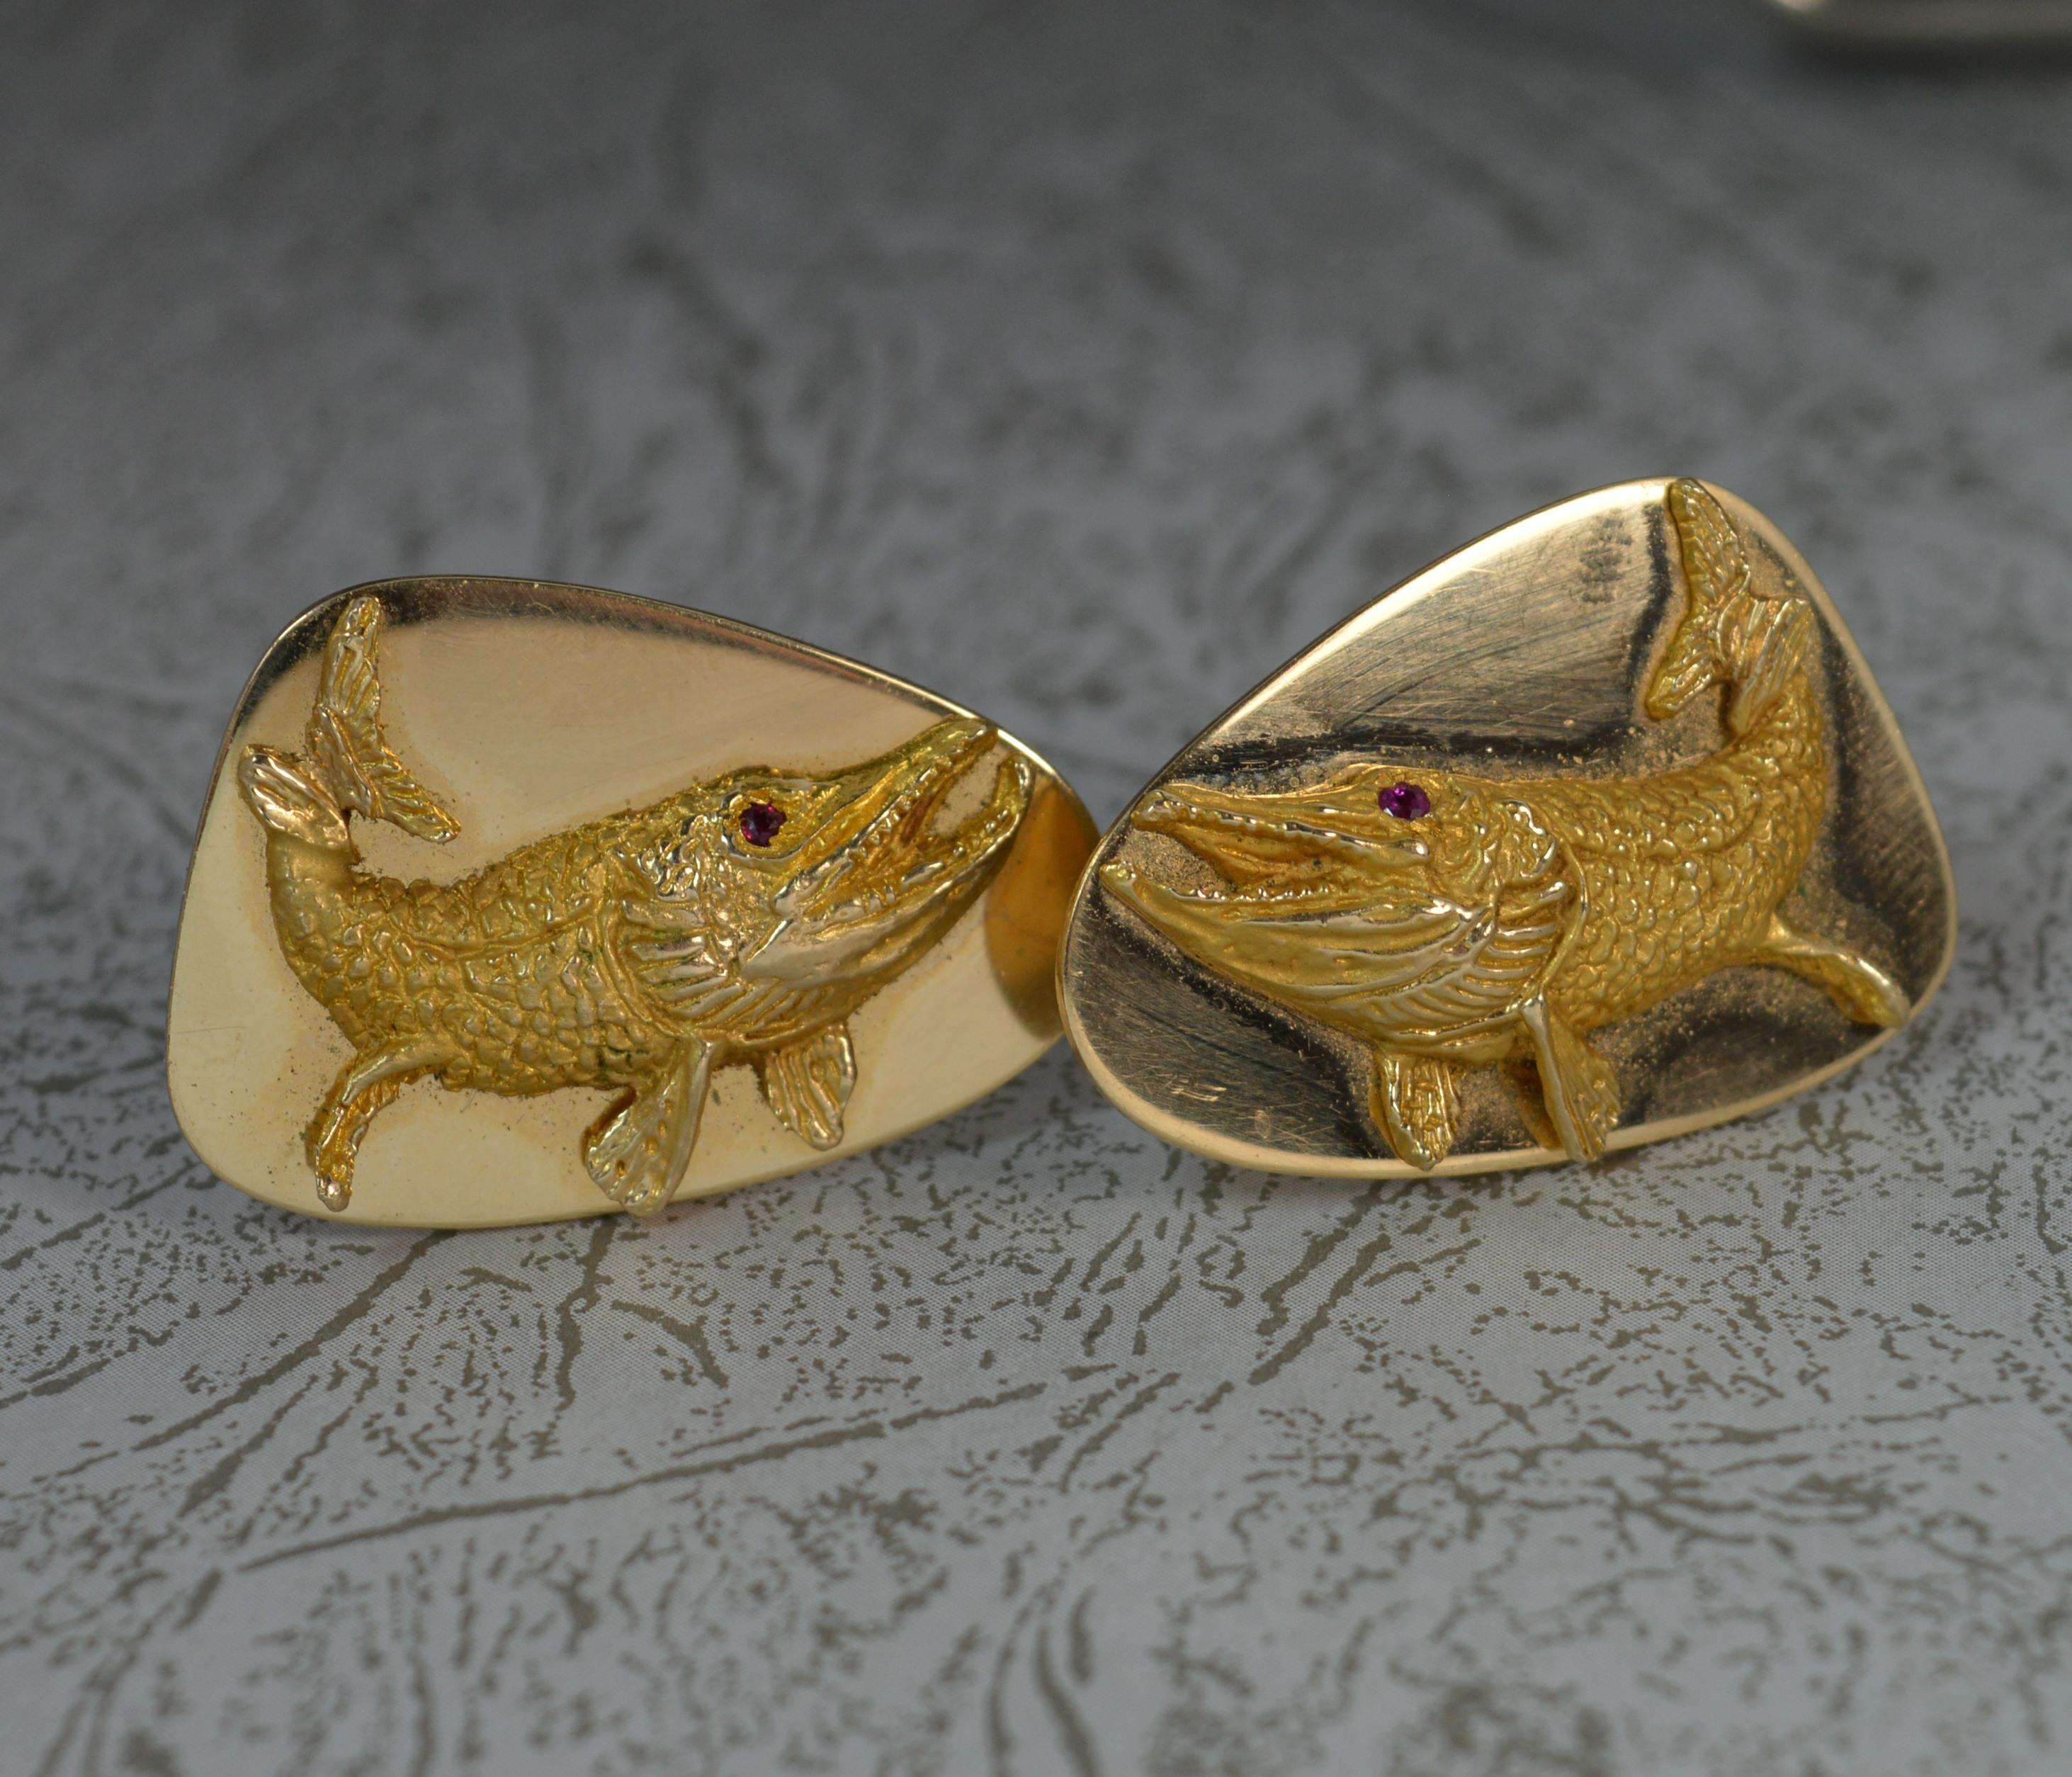 A stunning pair of TIFFANY and CO cufflinks.
Solid 14 carat yellow gold examples.
Designed with a textured fish design to each with a ruby to each eye.
Plain finish to each side.
Very large and weight example.

CONDITION ; Very good. Crisp design